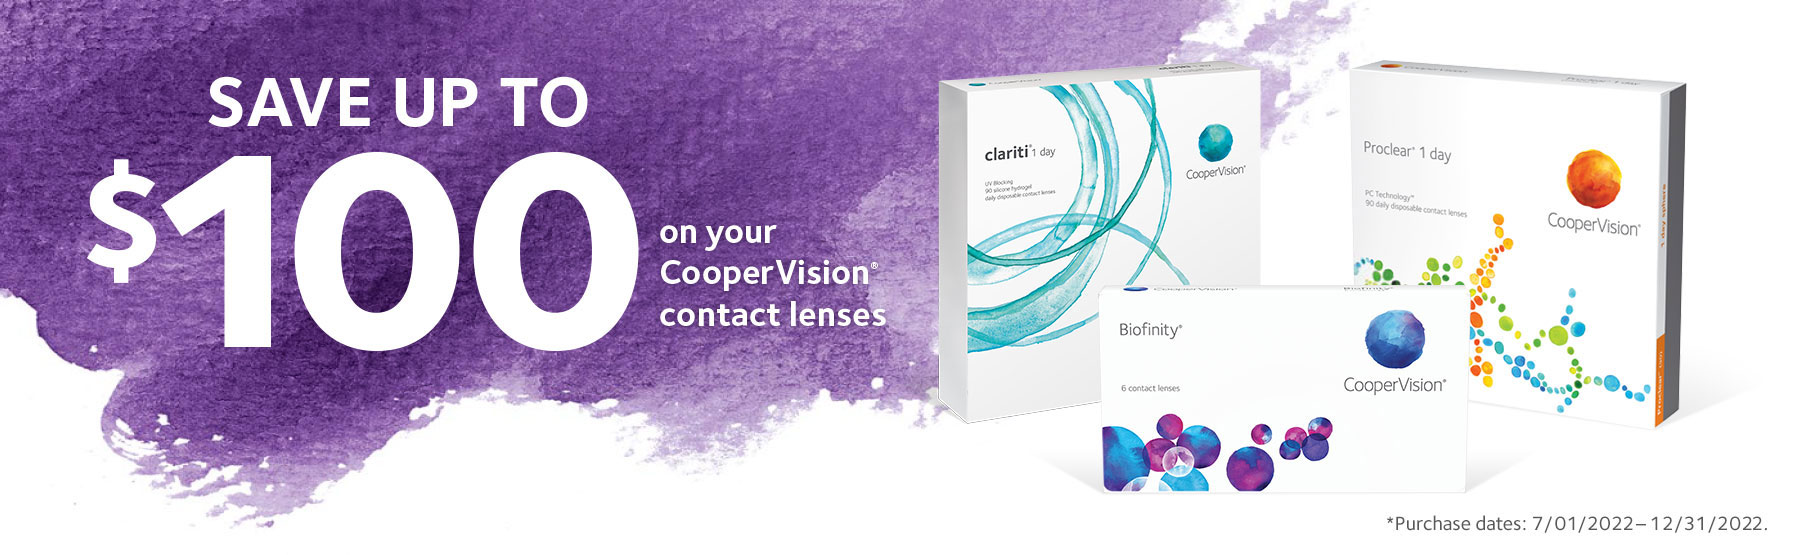 Save up to $100 on your CooperVision contact lenses